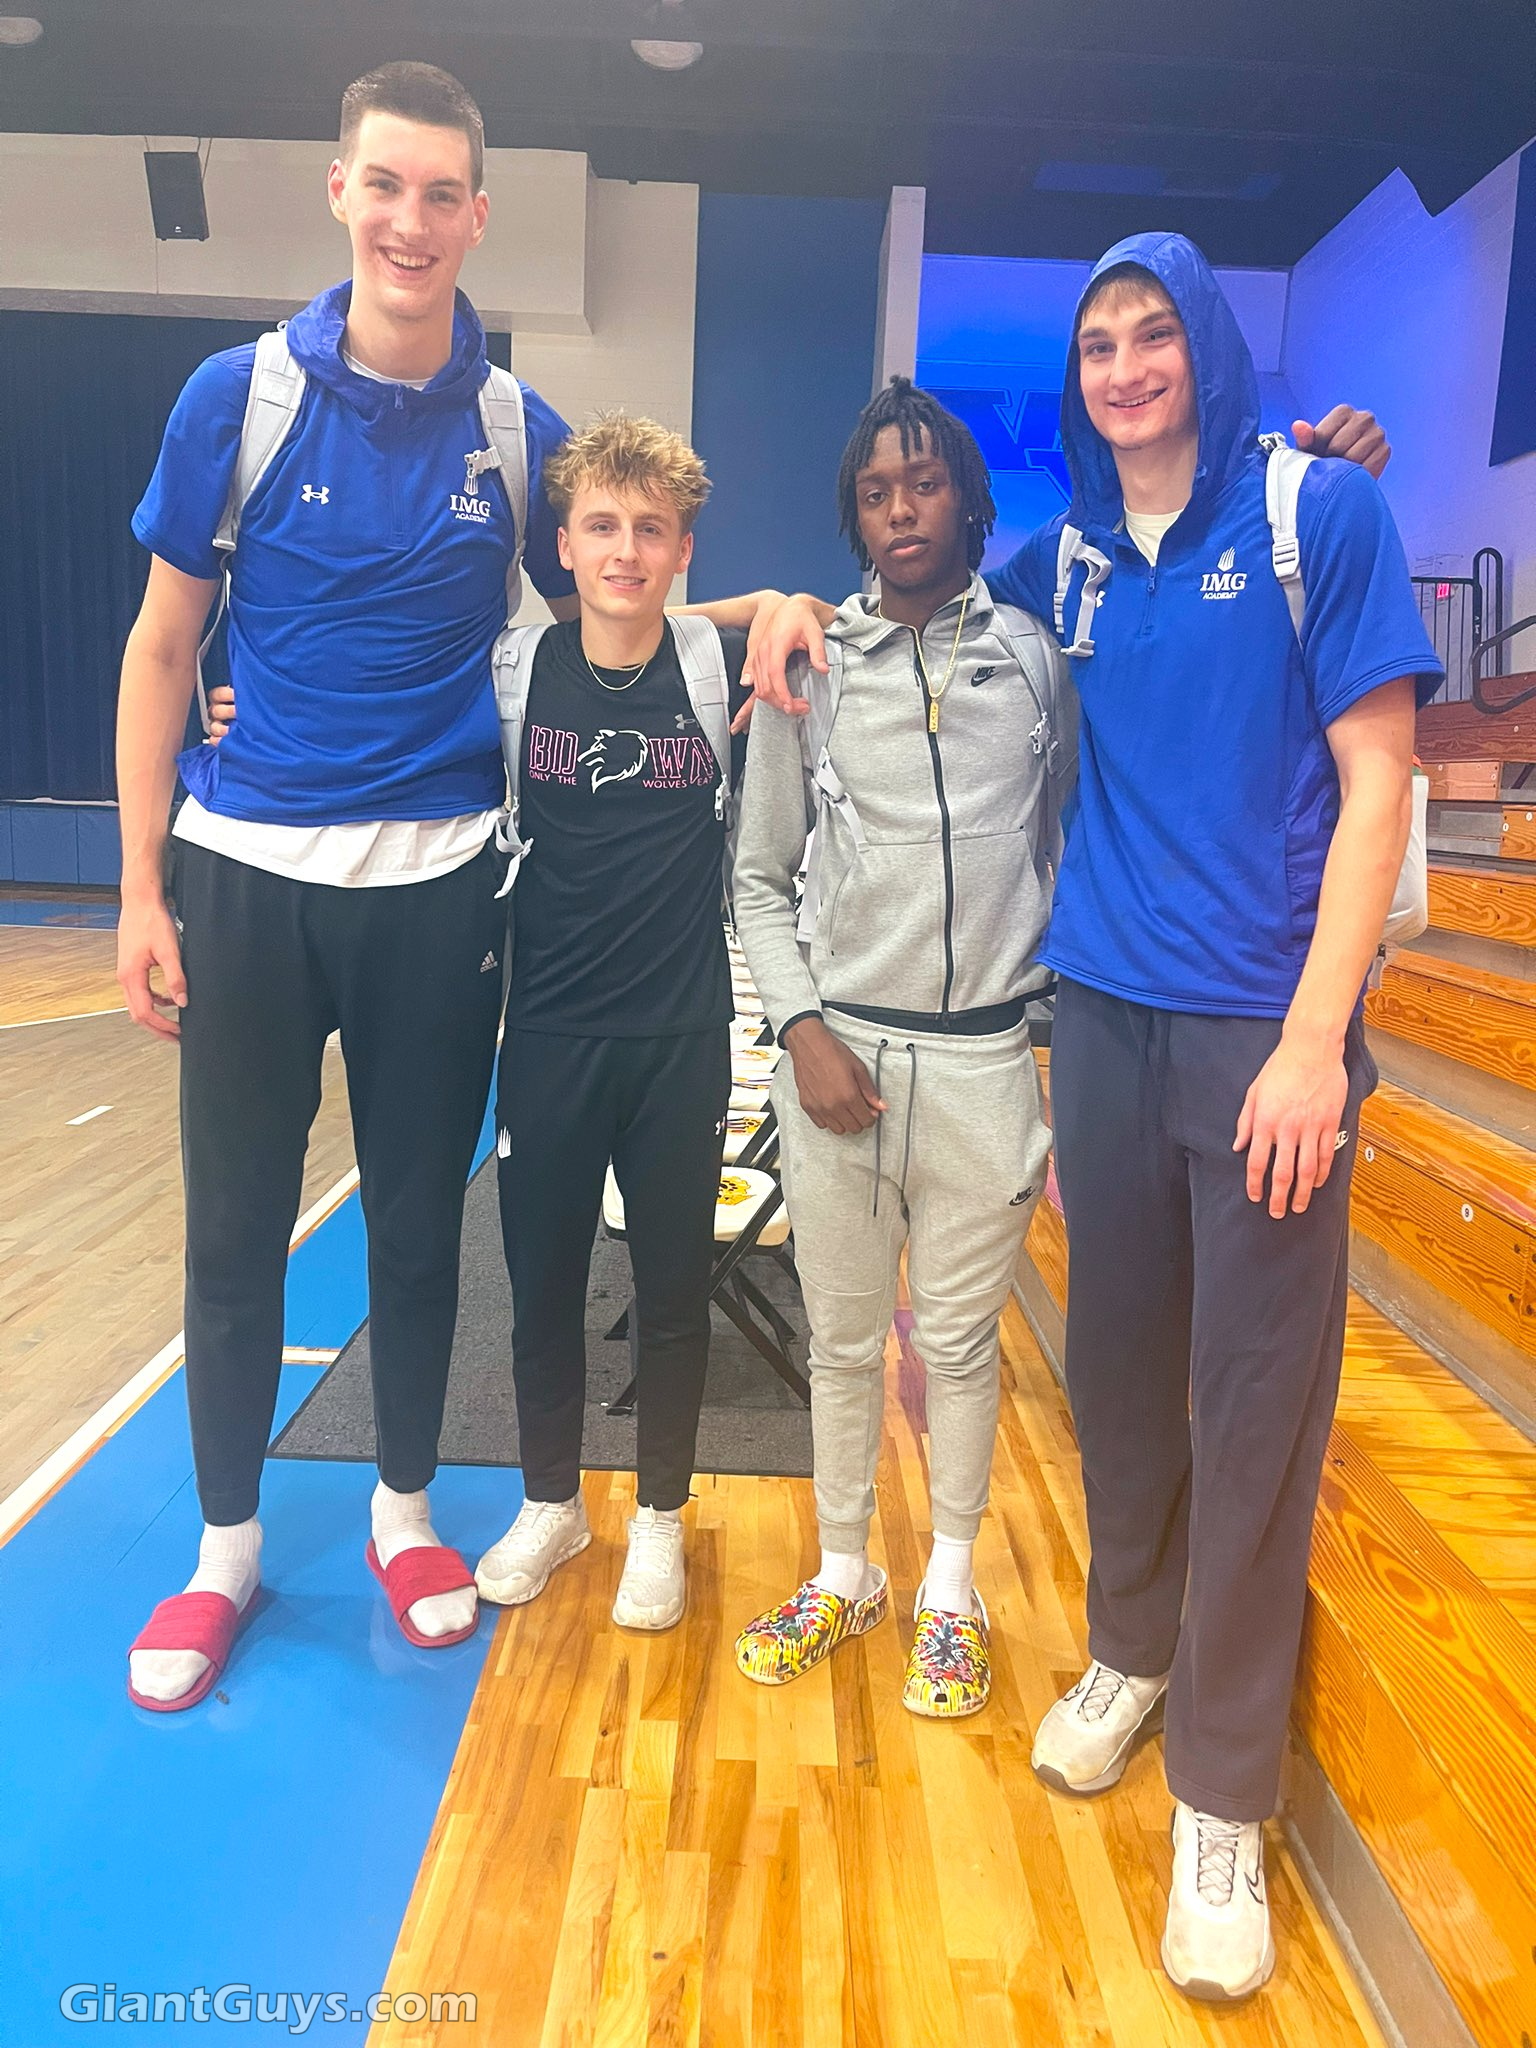 Olivier Rioux 7 foot 8 basketball IMG Academy